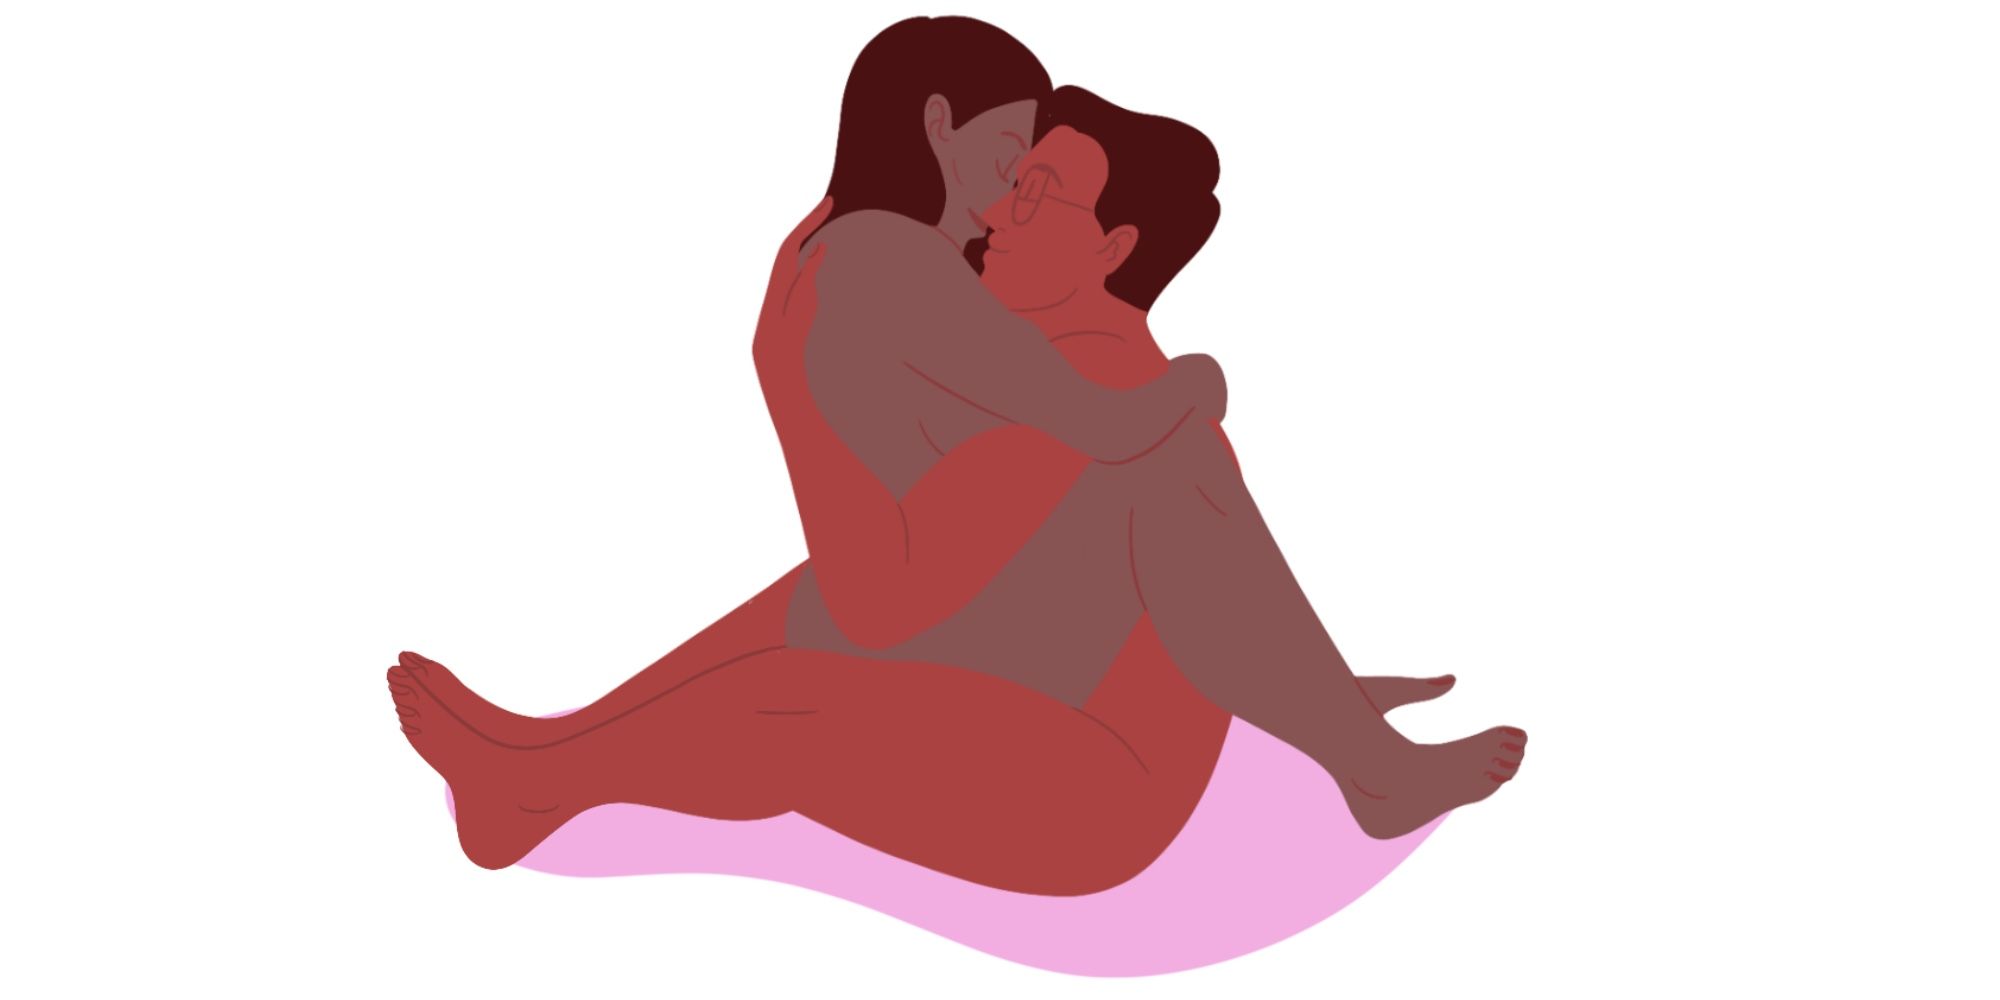 ten sexual positions for married couples